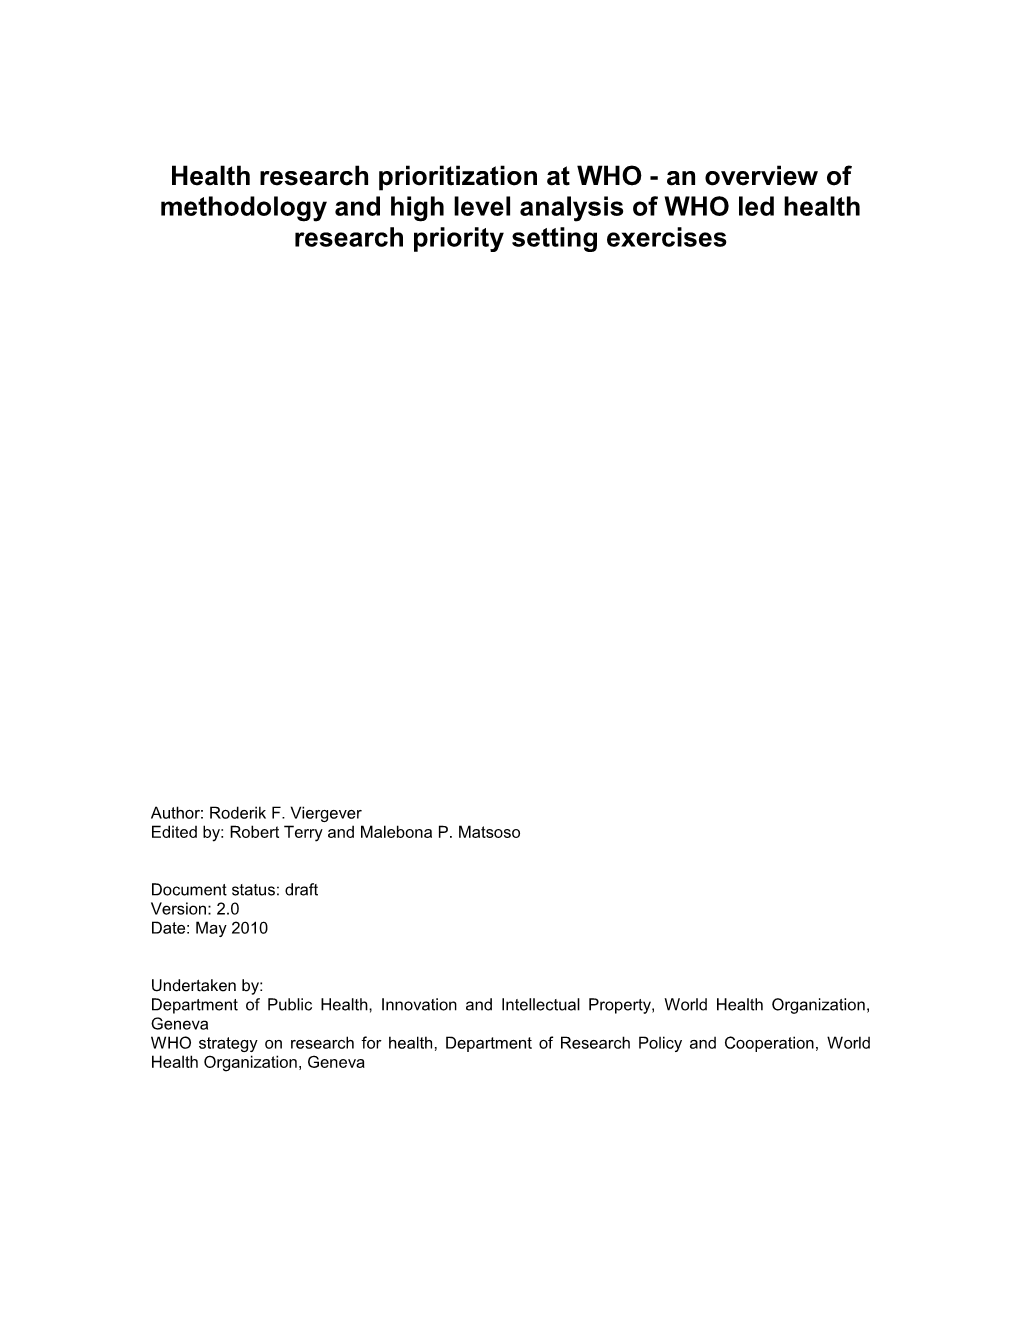 Health Research Prioritization at WHO - an Overview of Methodology and High Level Analysis